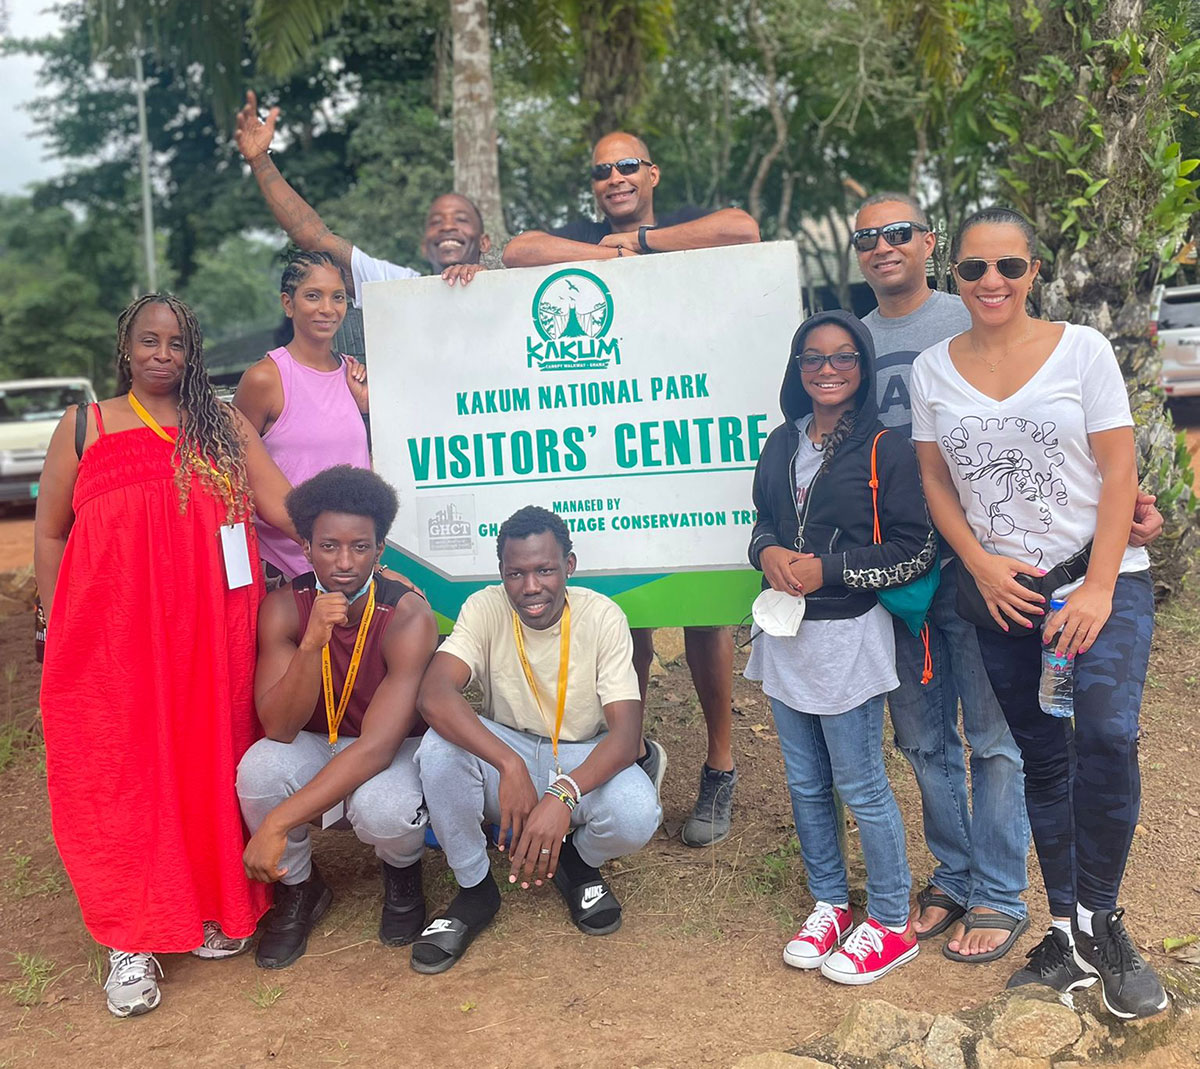 A group of city college students pose with a sign for a visitors center in Ghana